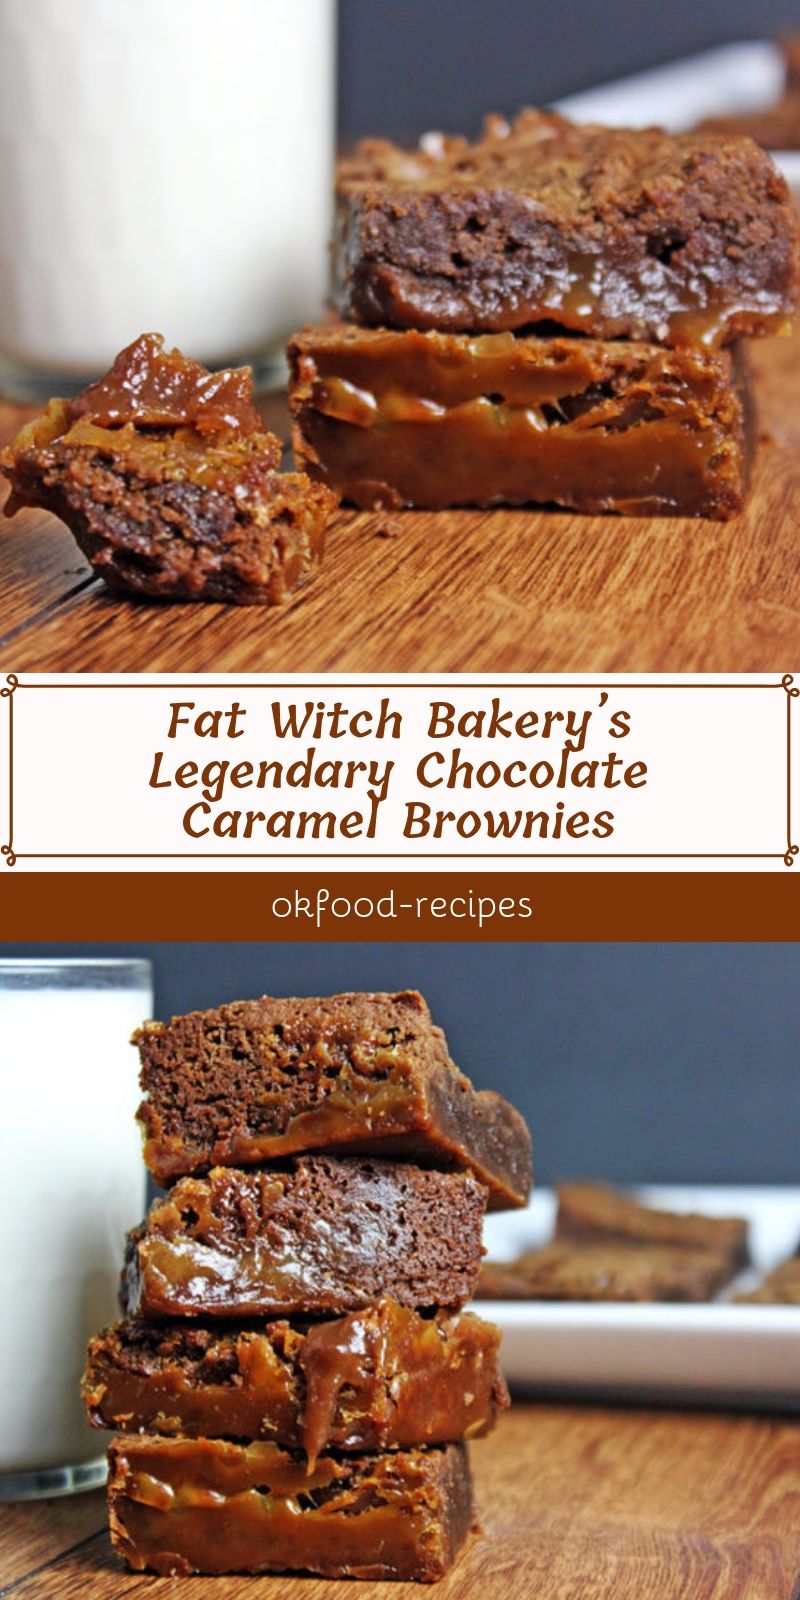 Fat Witch Bakery’s Legendary Chocolate Caramel Brownies